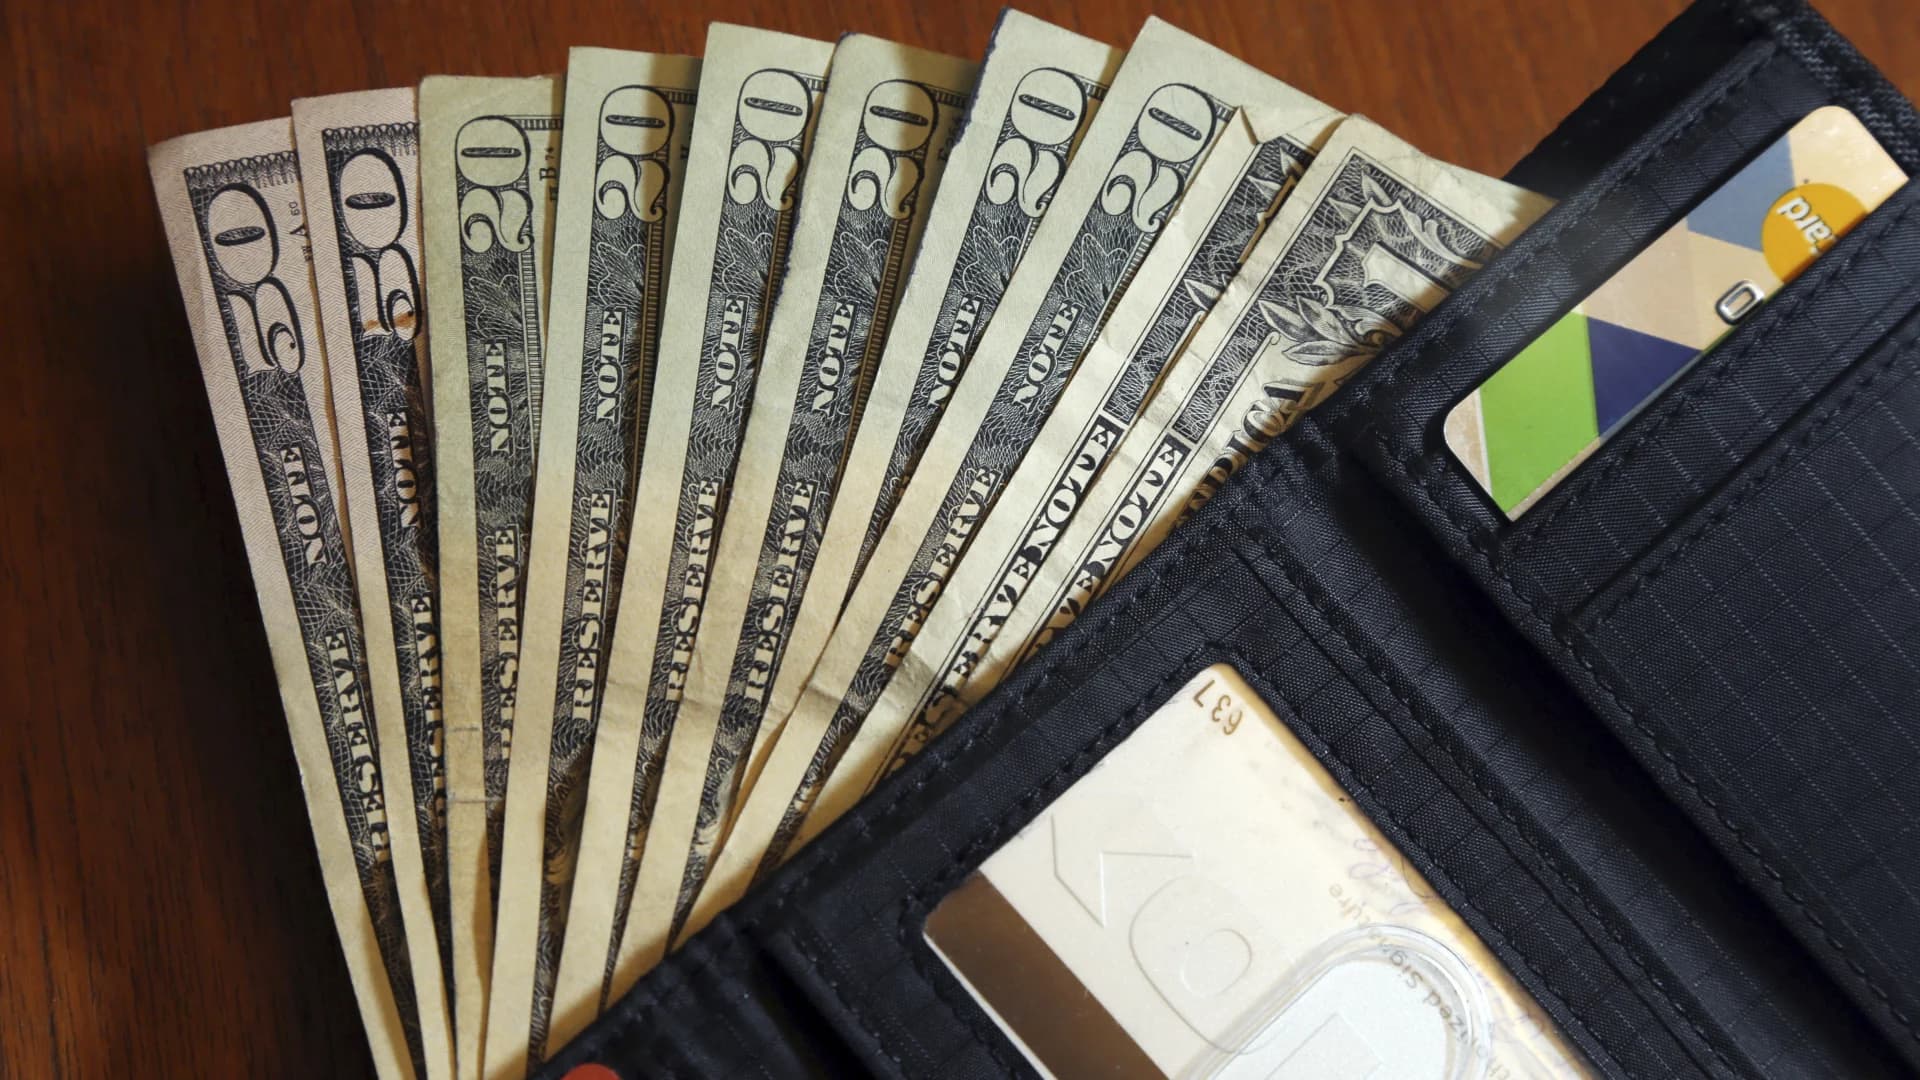 Budgeting can be a challenge. Here are 5 tips to get started